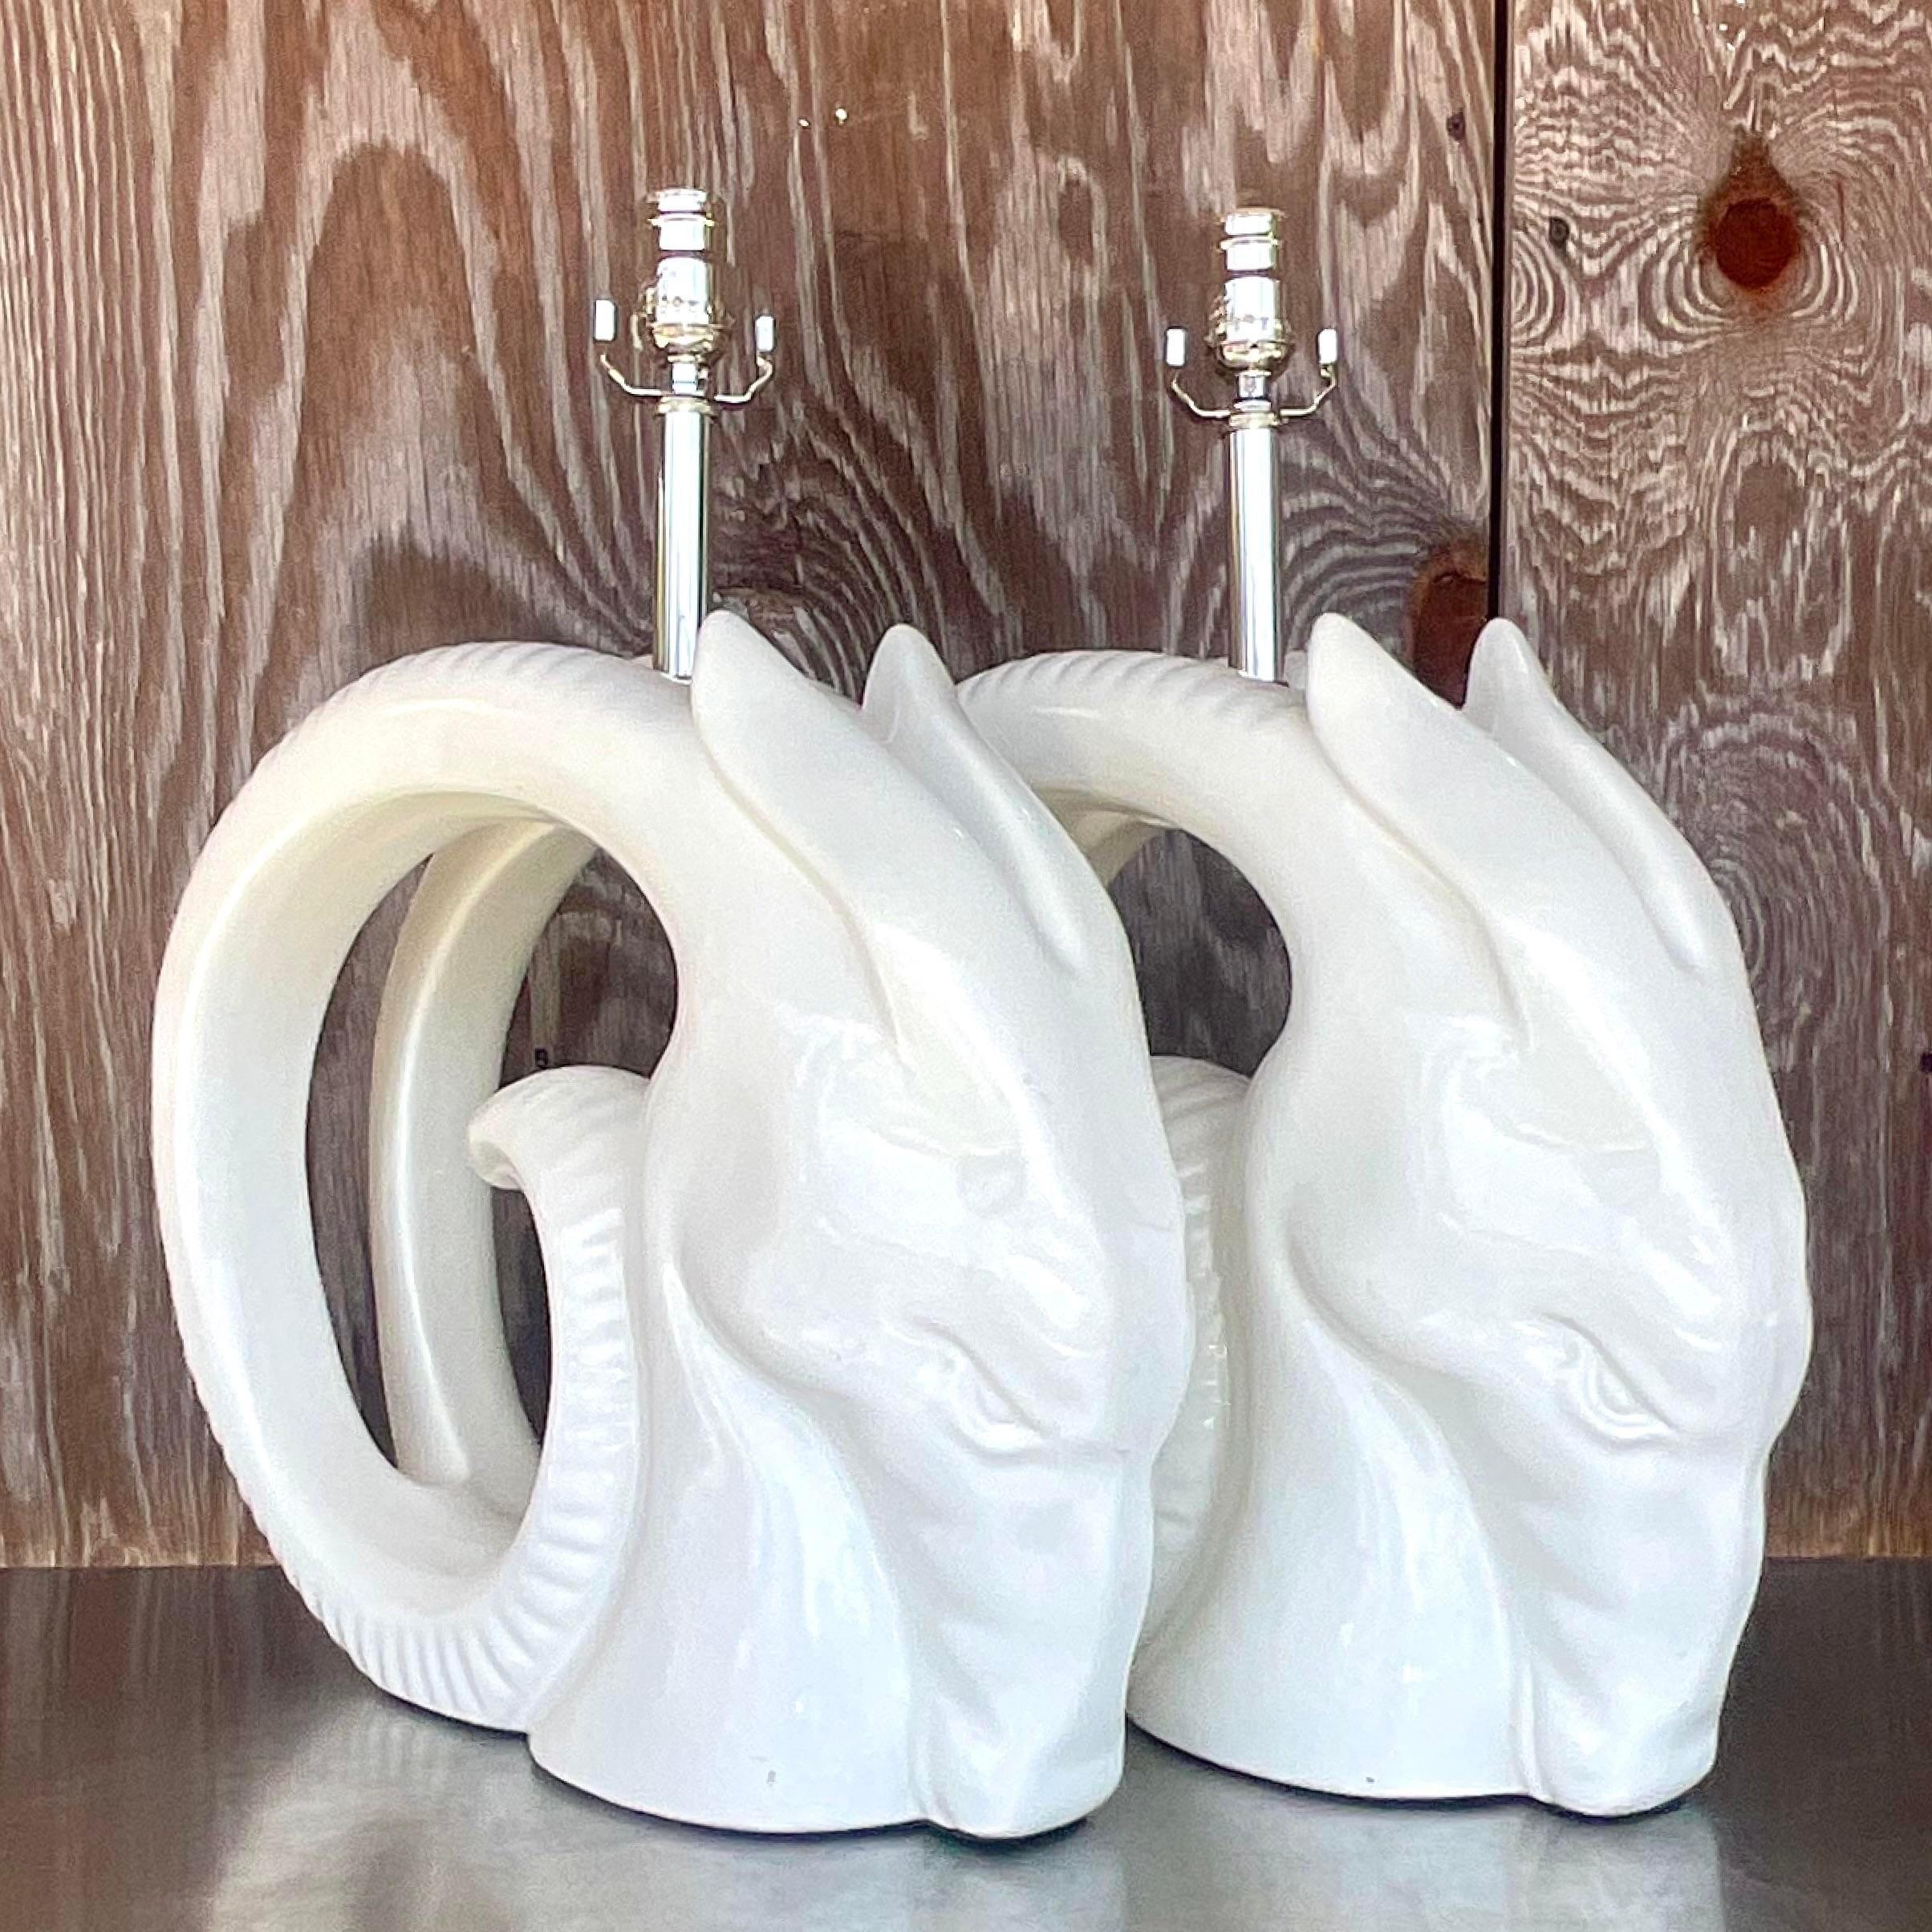 Vintage Monumental 80s Glazed Ceramic Rams Head Lamps - a Pair For Sale 1